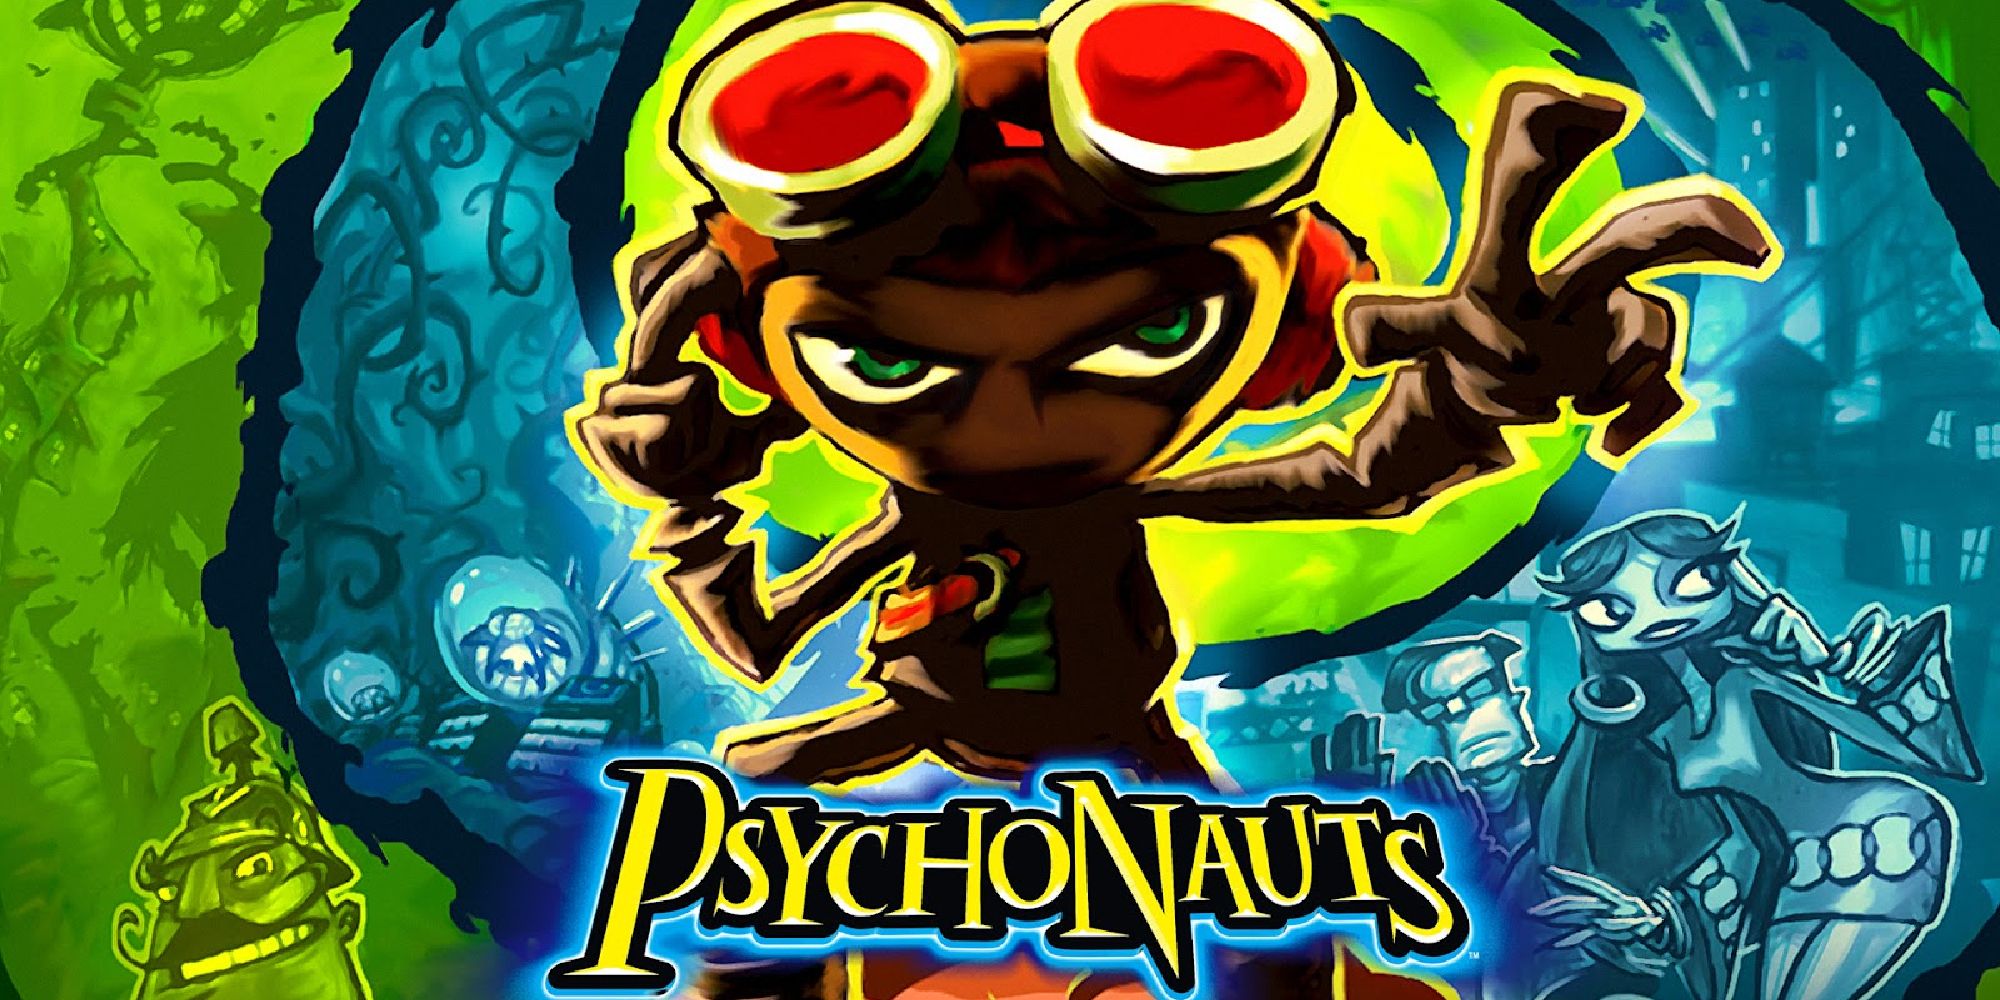 Key art for Psychonauts 1, showing Raz using his psychic powers and several other characters in the background